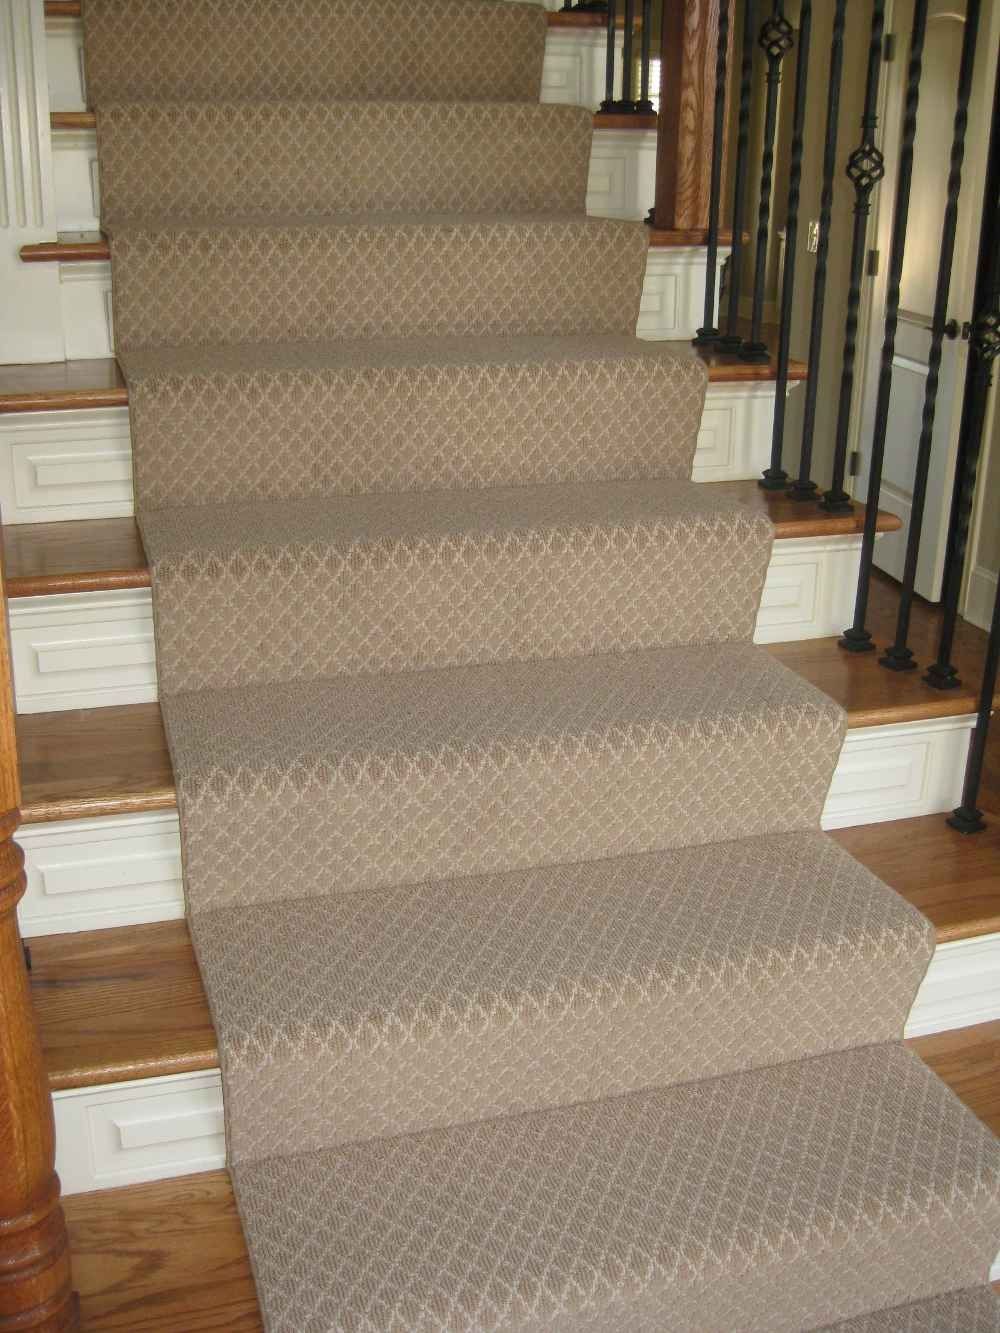 Keep Plastic Carpet Runners For Stairs Interior Home Design In Carpet Runners For Stairs And Hallways (View 11 of 20)